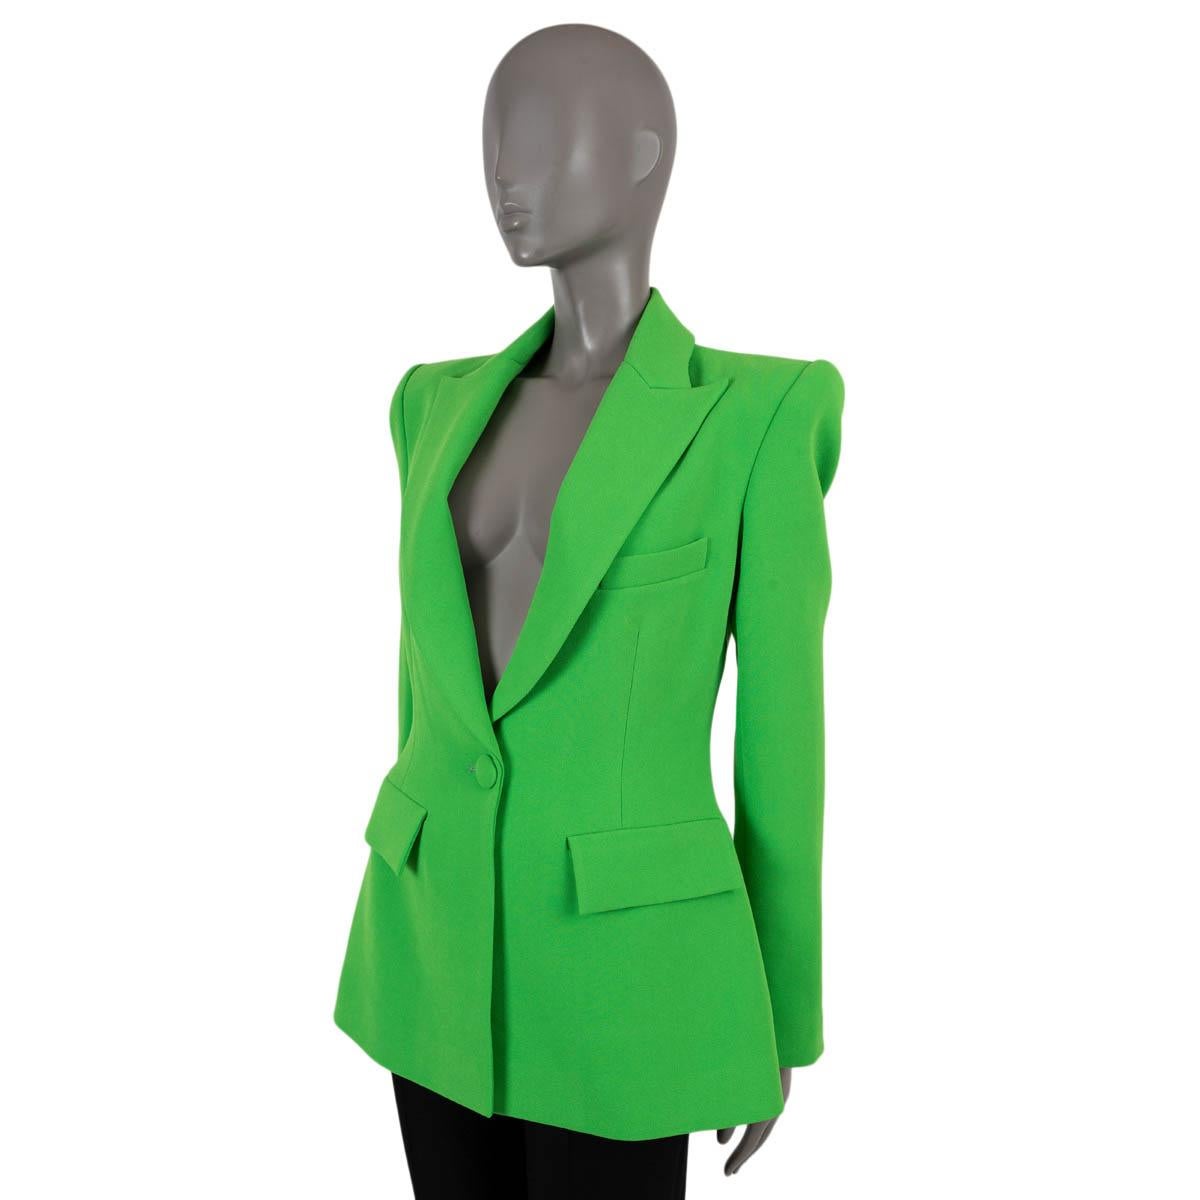 100% authentic Alex Perry Carter blazer in grass green stretch crêpe polyester (63%) and acetate (37%). Features peak lapels, sharp shoulder, a welt pocket and two flap pockets at the waist. Closes with a fabric cover button on the front and is